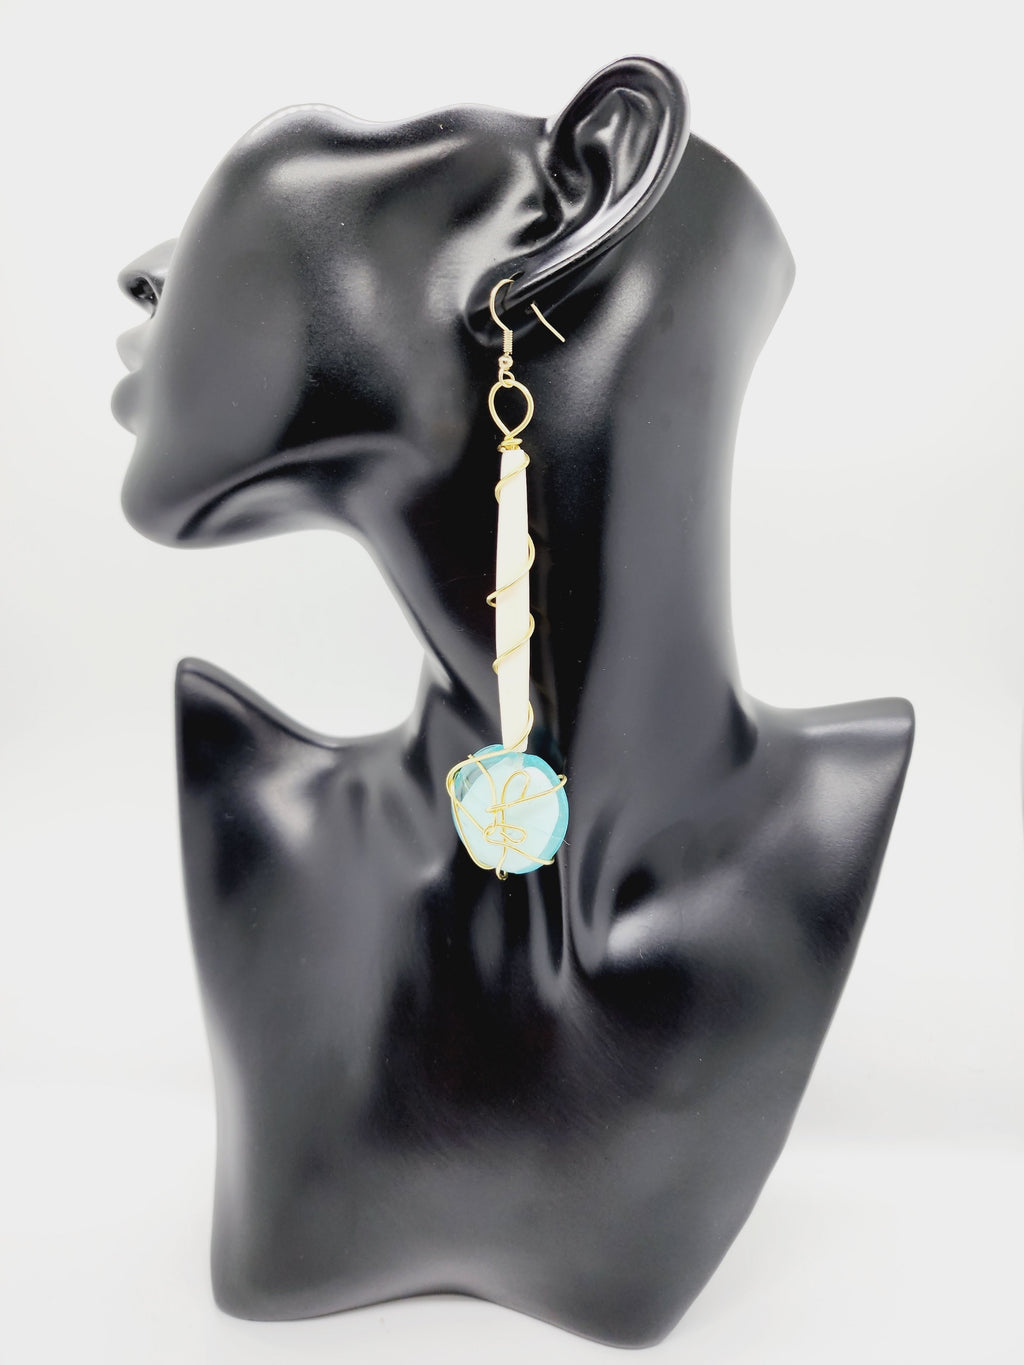 Length: 4.75 inches | Weight: 1.3 ounces  Distinctly You! These handmade earrings are made using white Batik bone tube, gold wire wrapping, Italian Murano aqua glass, and hypoallergenic hooks with back closures. 